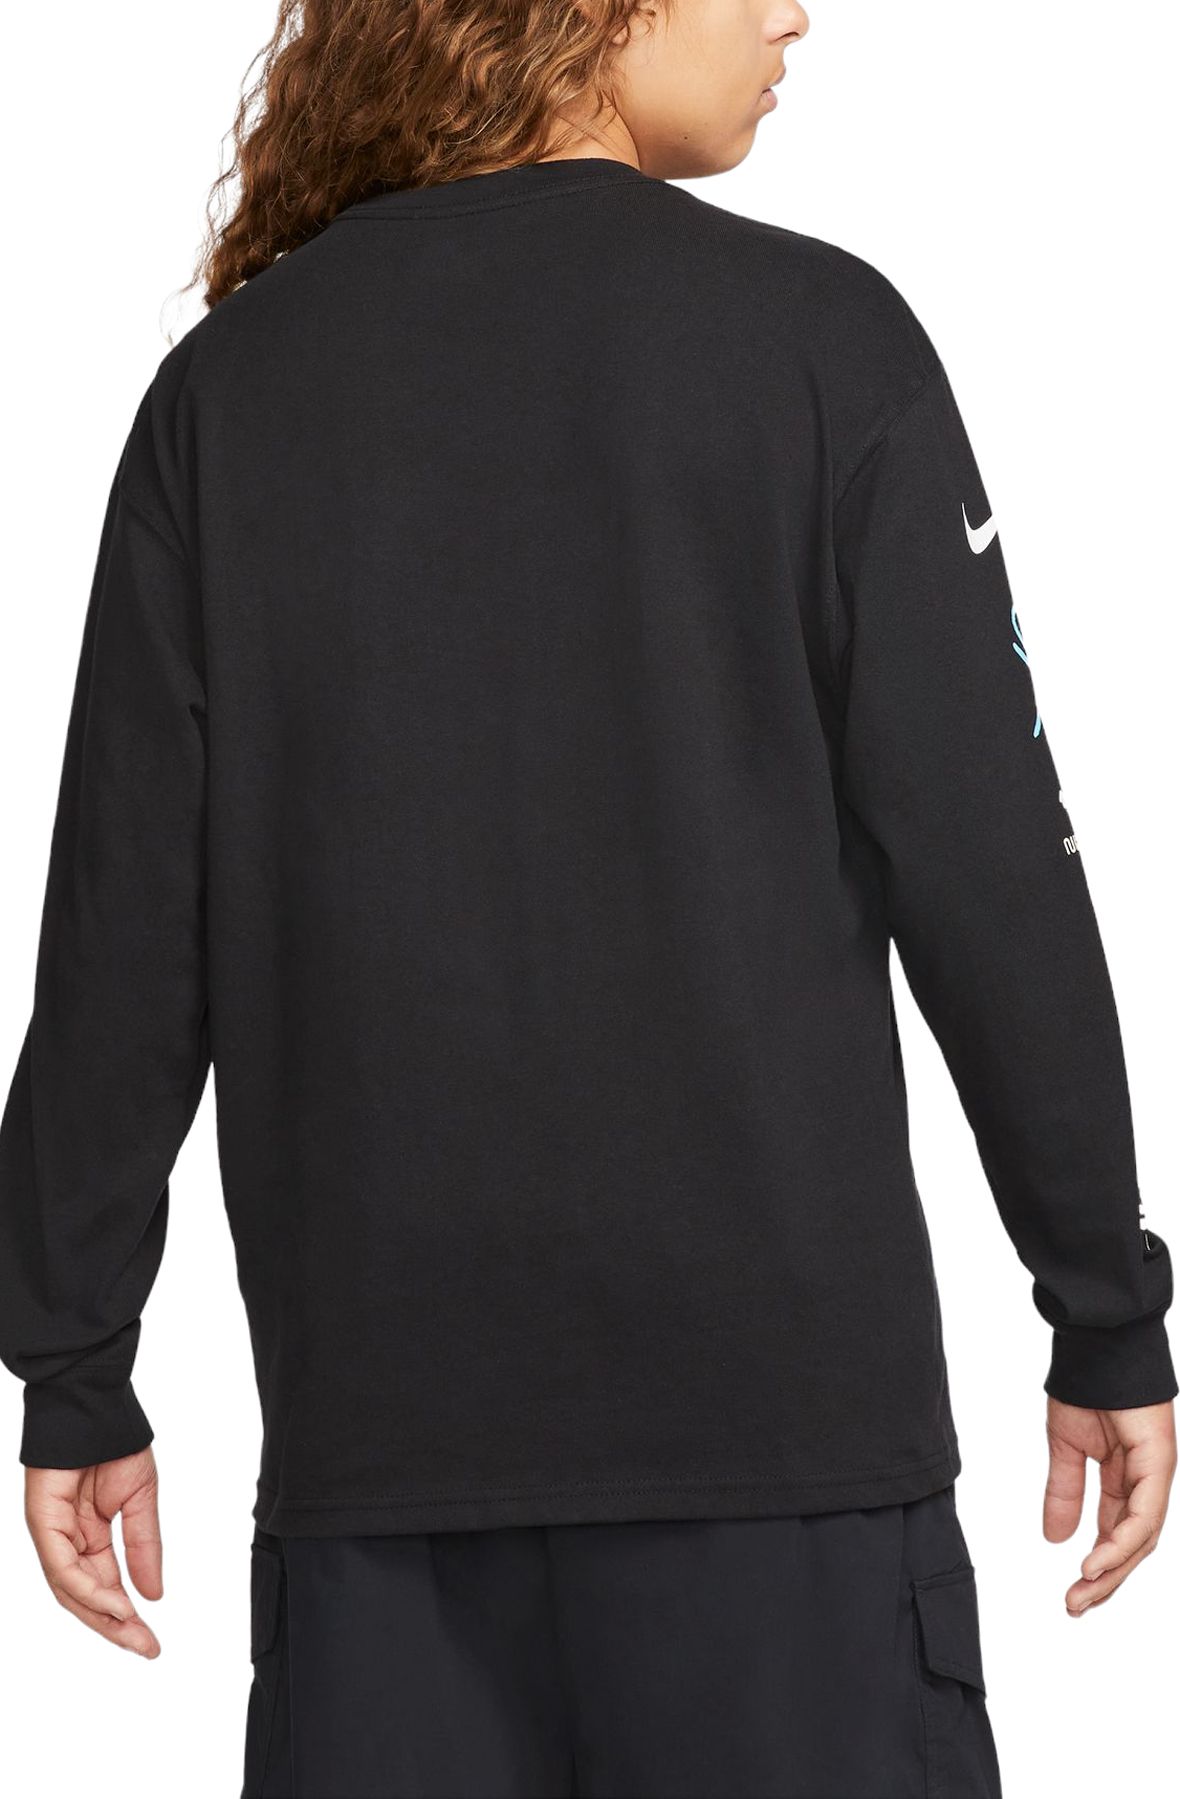 Nike Compression M DD1990-010 Long-Sleeve Thermal T-Shirt – Your